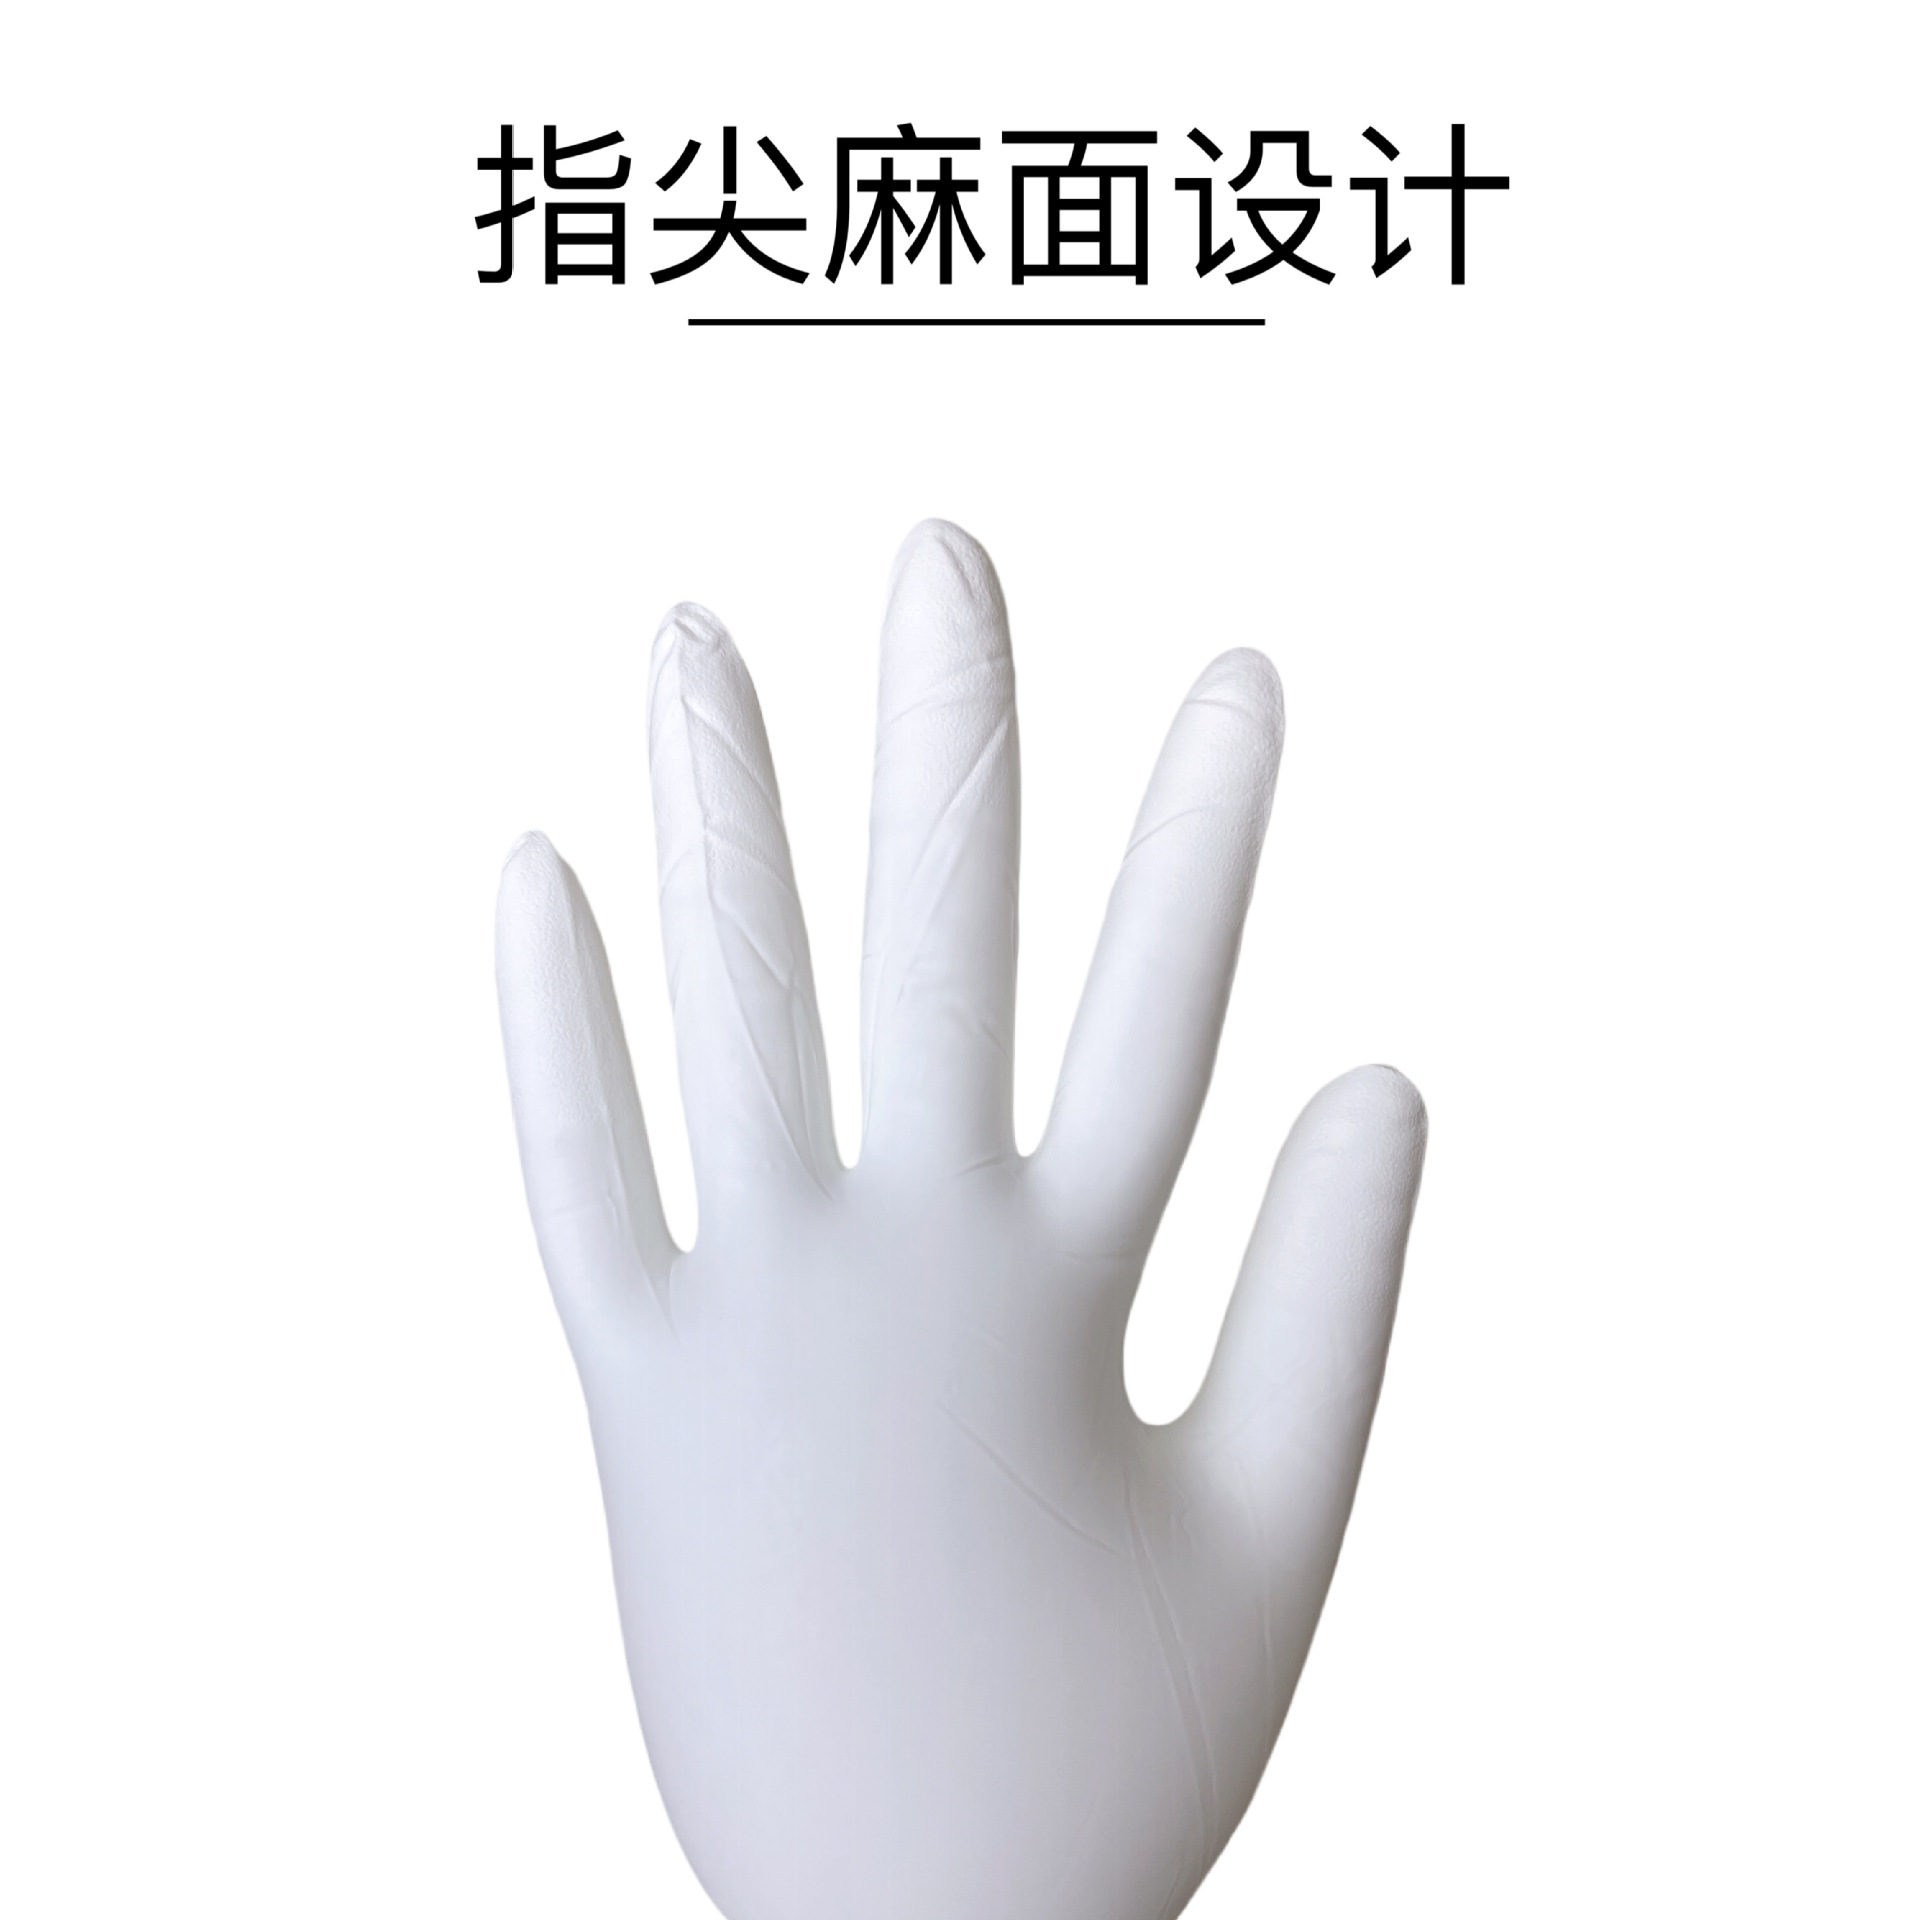 Kimberly-Clark G3 White Nitrile Gloves Grade 10 Dust-Free Purification Workshop Anti-Static Biological Pharmaceutical Electronic Semiconductor